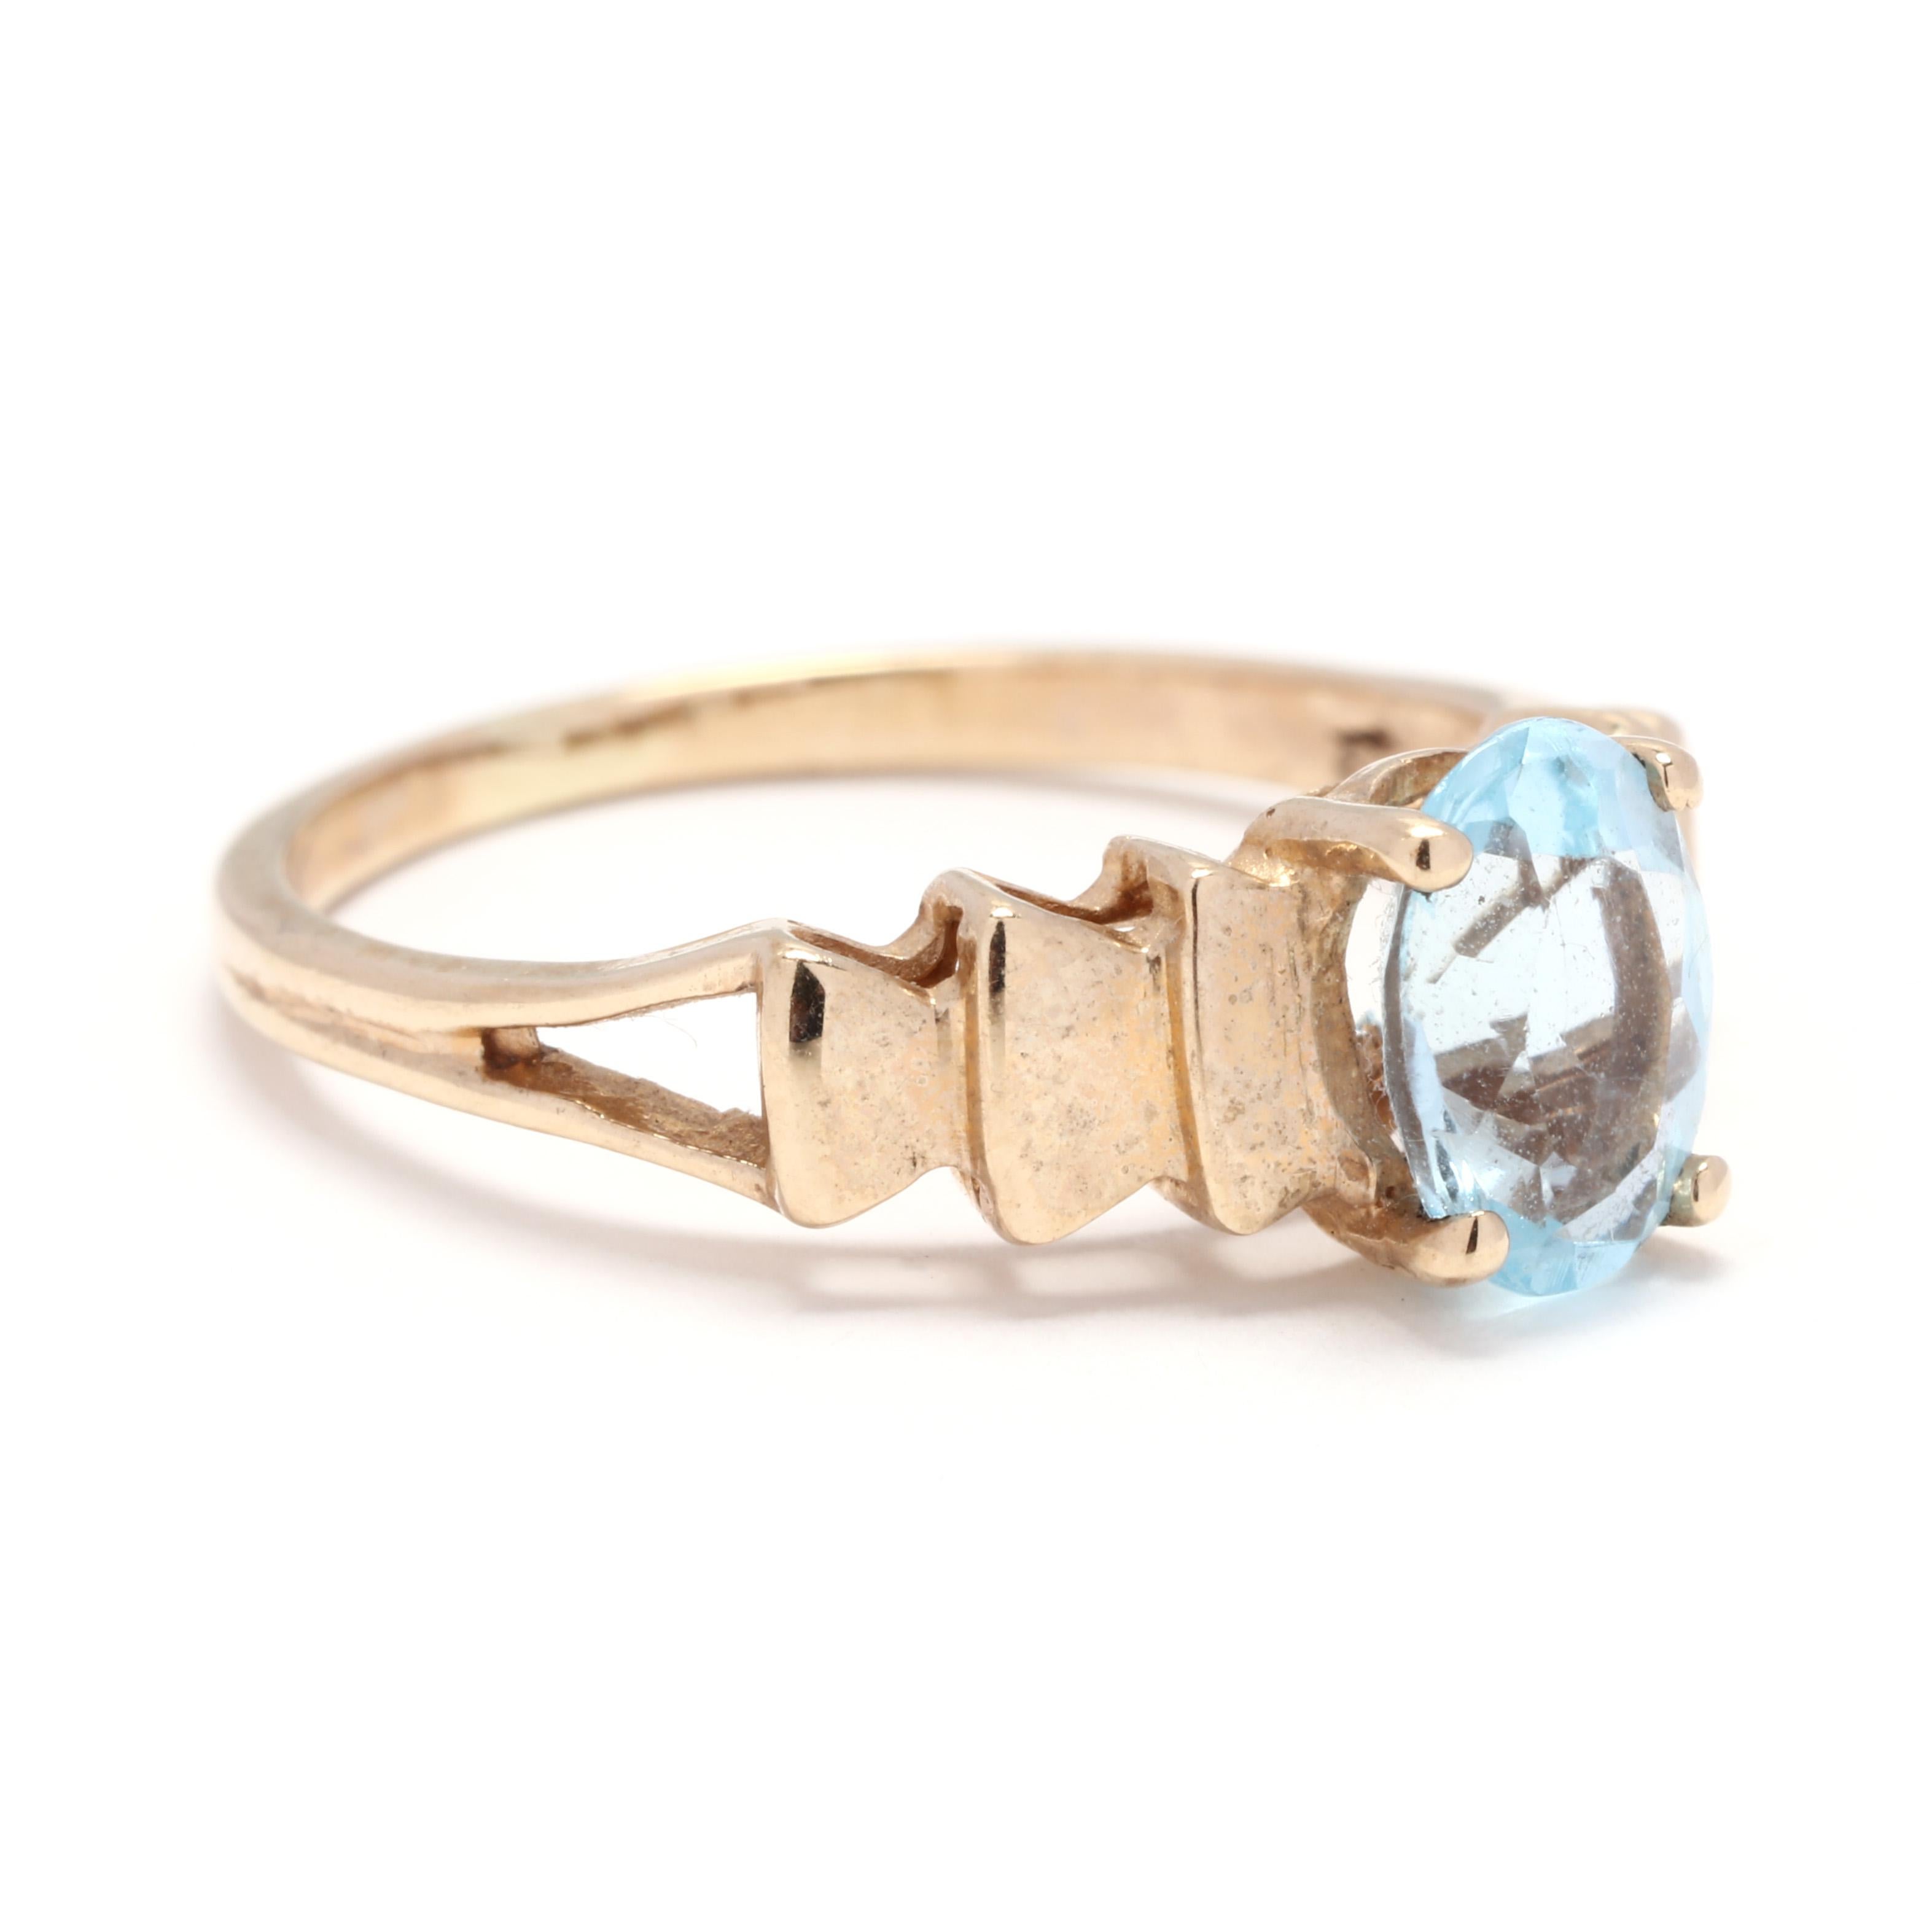 A 10 karat yellow gold blue topaz step ring. This ring features a prong set, oval cut blue topaz stone weighing approximately 1 carat set on a polished step mounting with a split shank.

Stones:
- blue topaz, 1 stone
- oval cut
- 7.22 x 5.22 mm
-